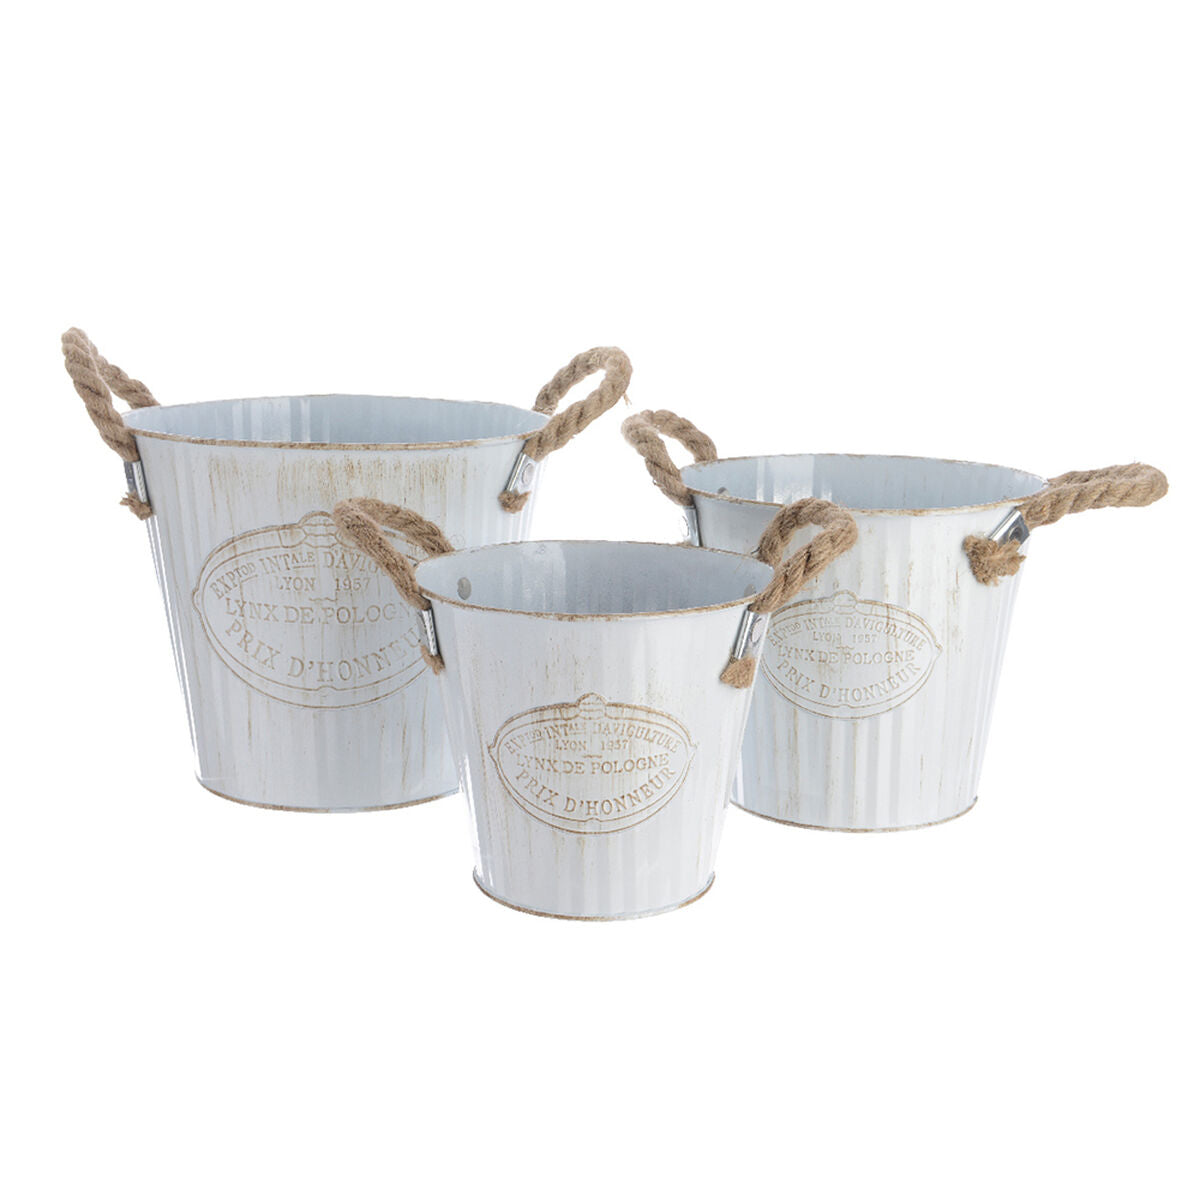 Set of Planters Decoris White Metal Rope With handles (3 Pieces)